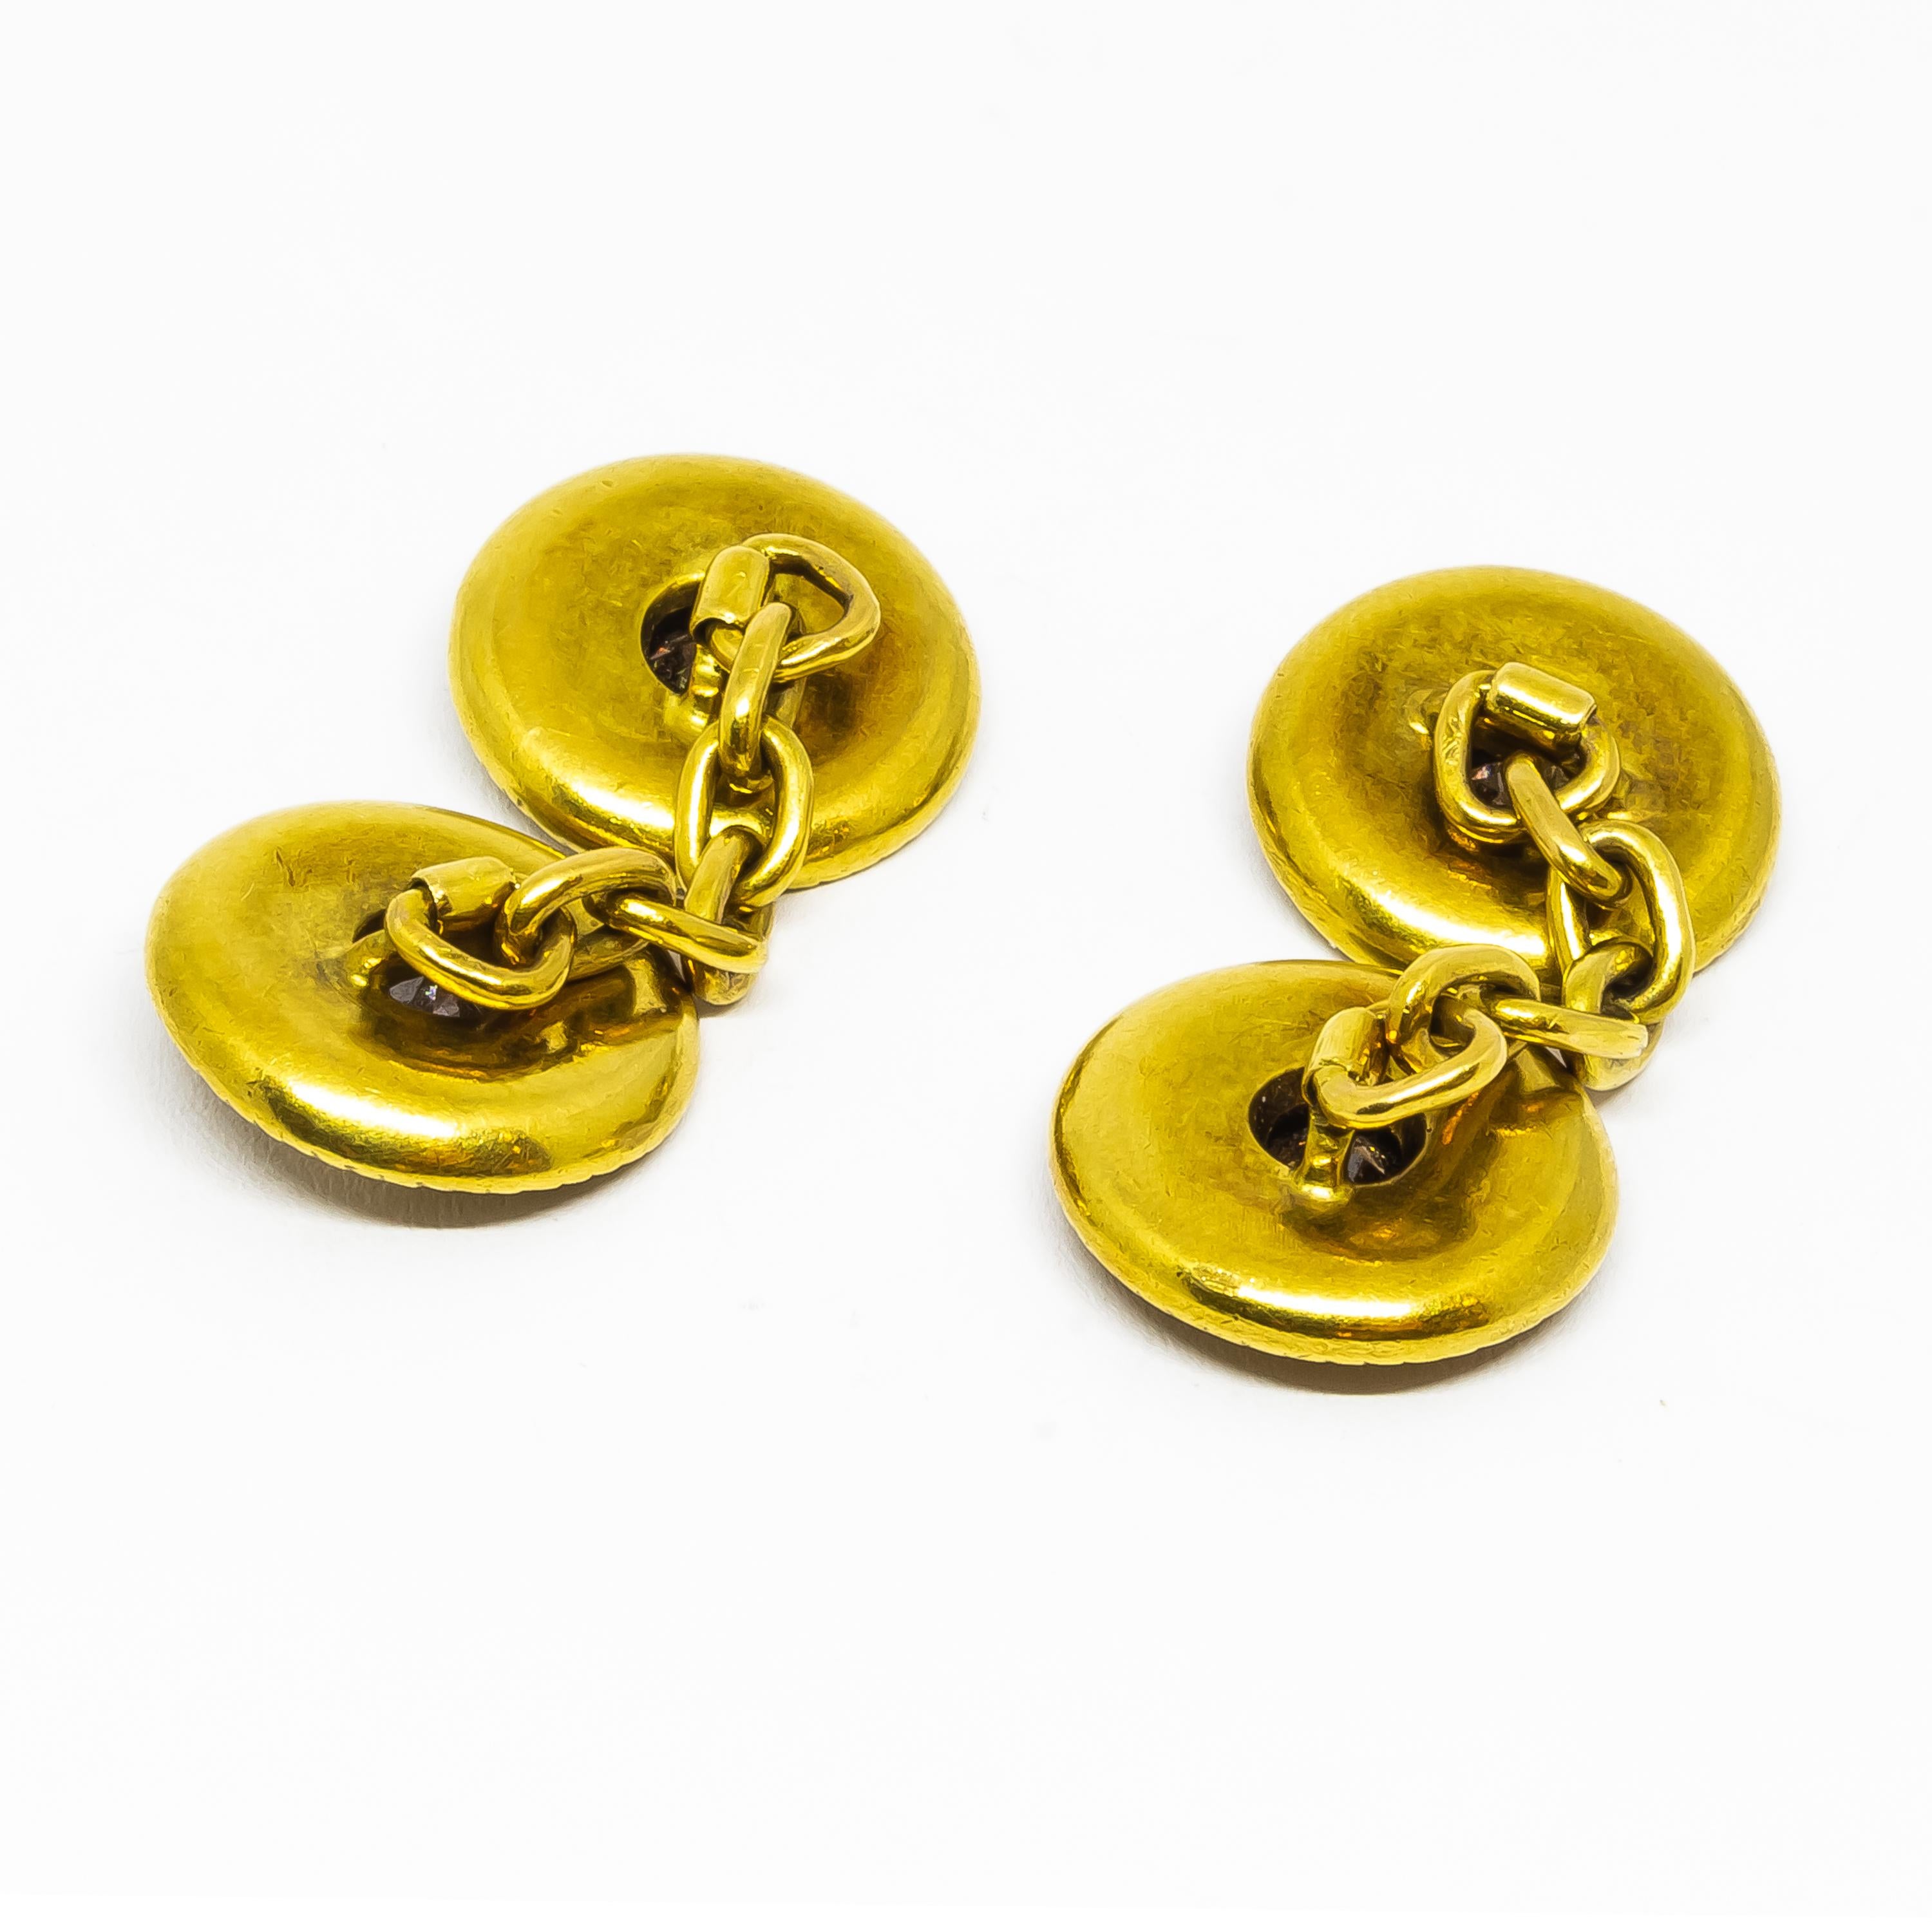 Desbazeille Art Nouveau Champagne Diamond and Gold Cufflinks, Circa 1895 In Good Condition For Sale In London, GB